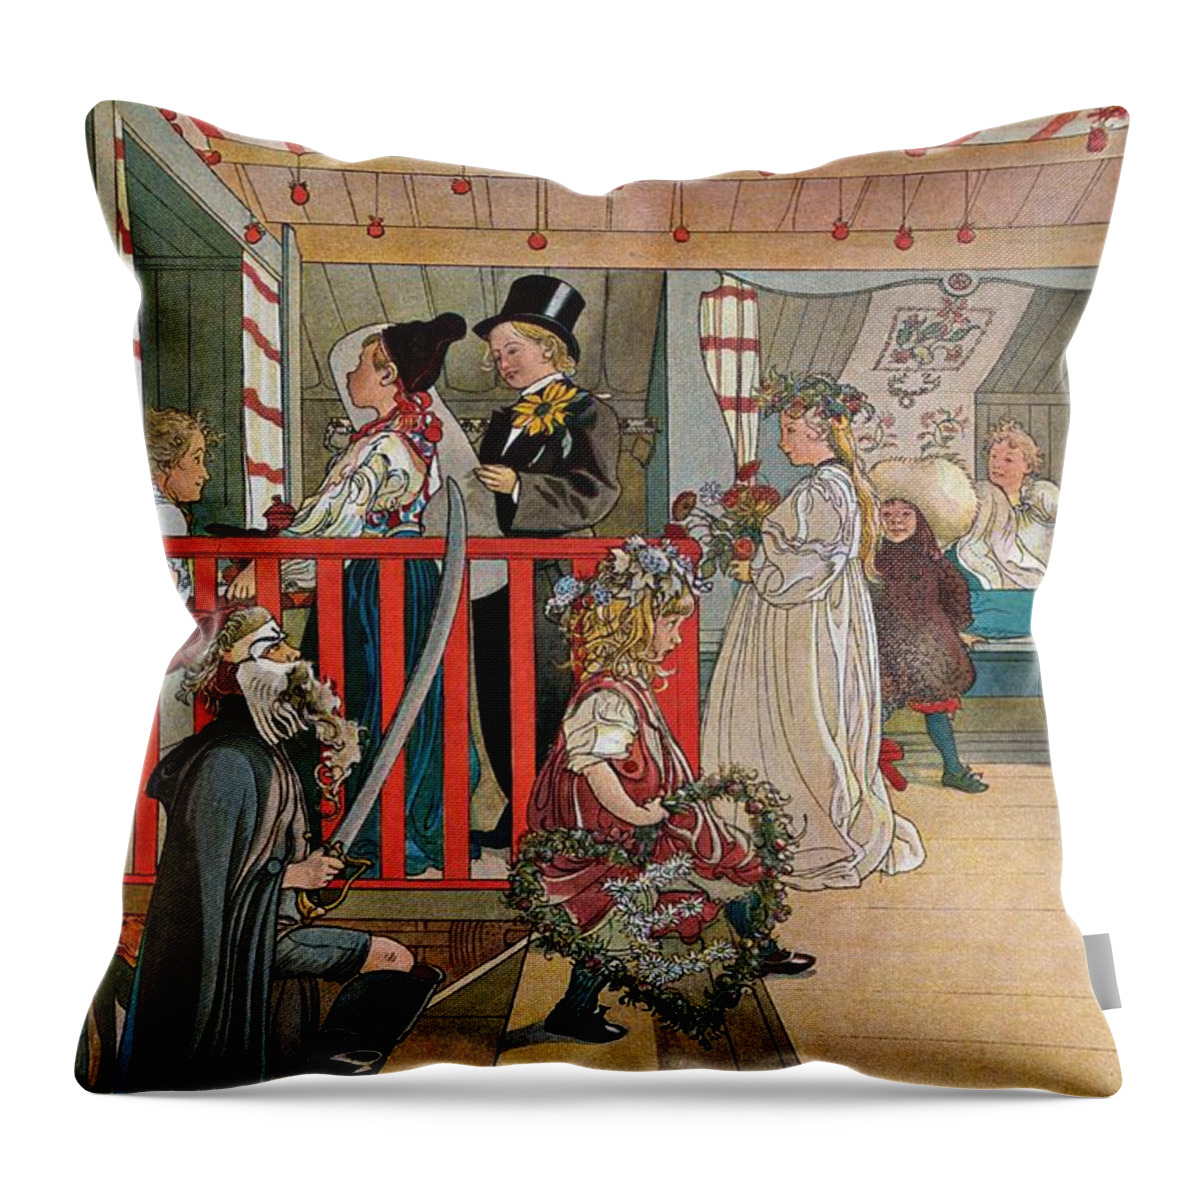 Adrianus Throw Pillow featuring the painting Carl Larsson #2 by MotionAge Designs